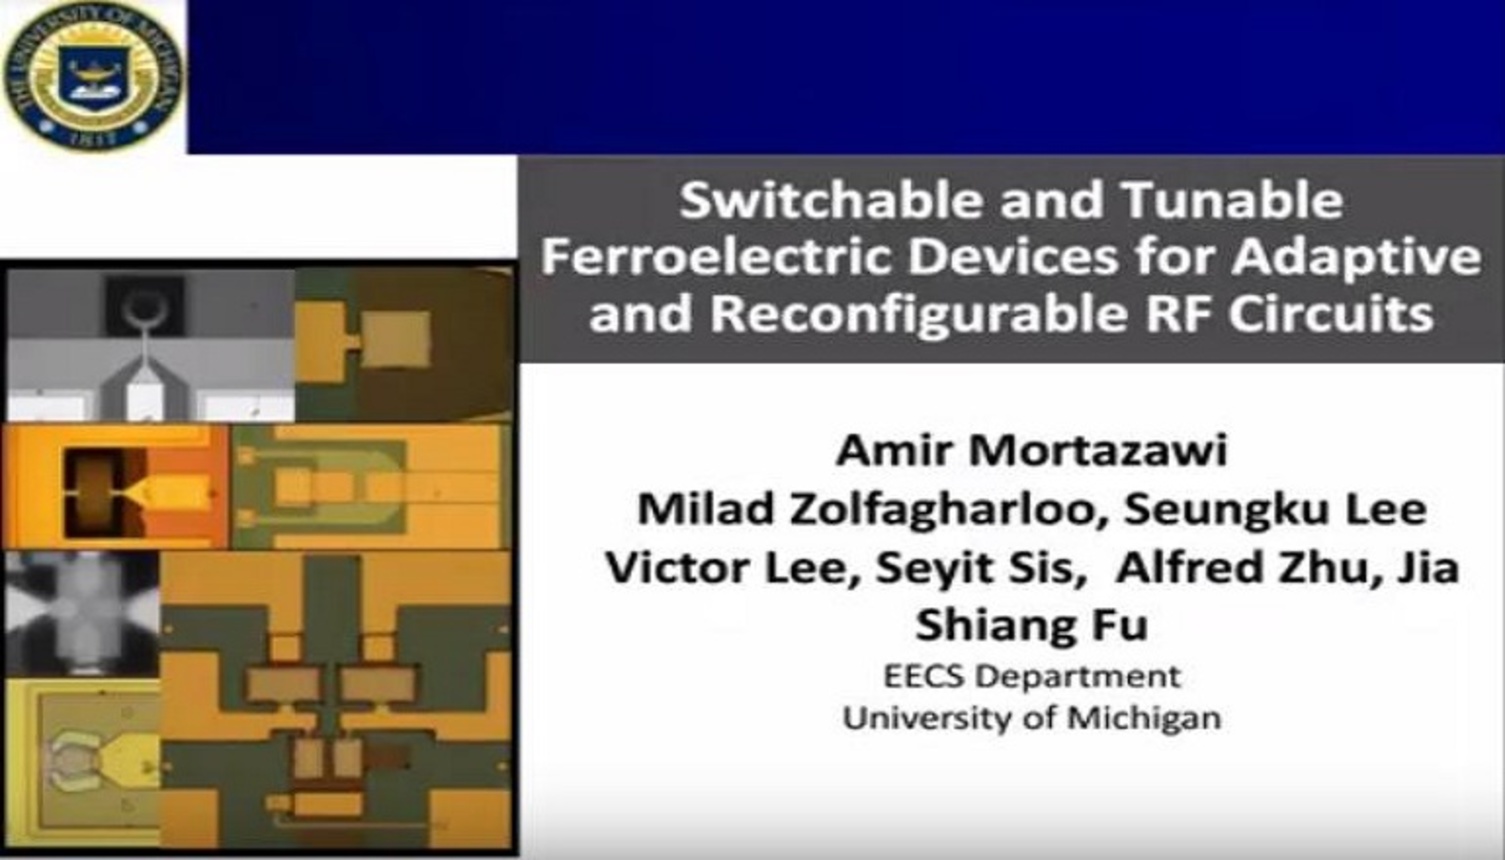 Switchable and Tunable Ferroelectric Devices for Adaptive and Reconfigurable RF Circuits Video